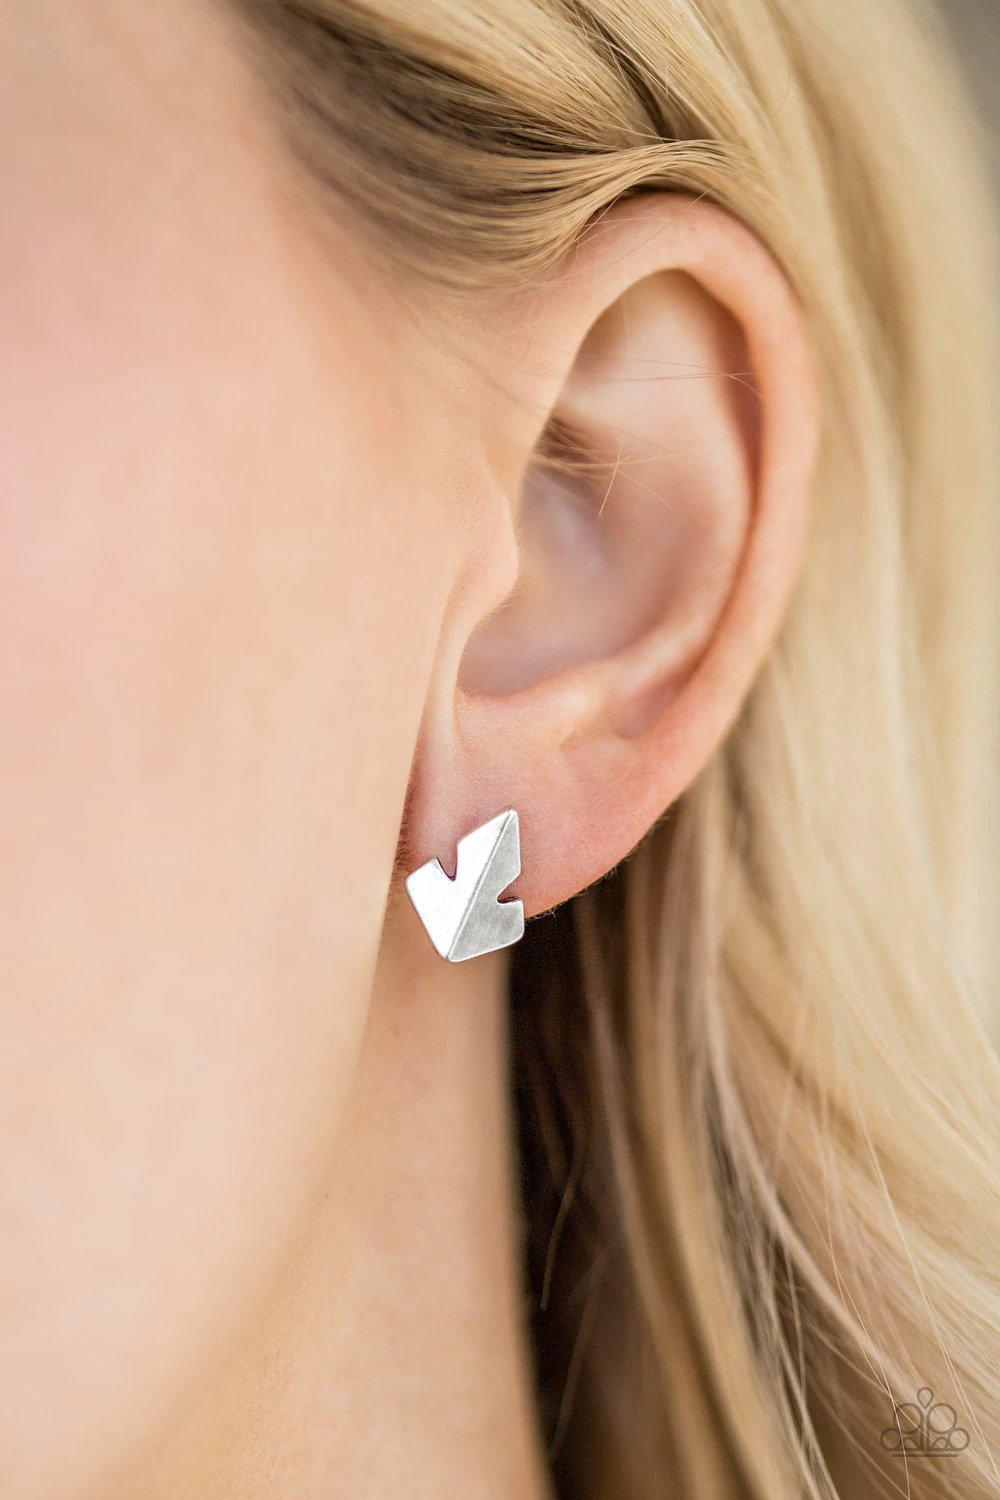 Fire Drill Silver Post Earrings - Paparazzi Accessories- on model - CarasShop.com - $5 Jewelry by Cara Jewels